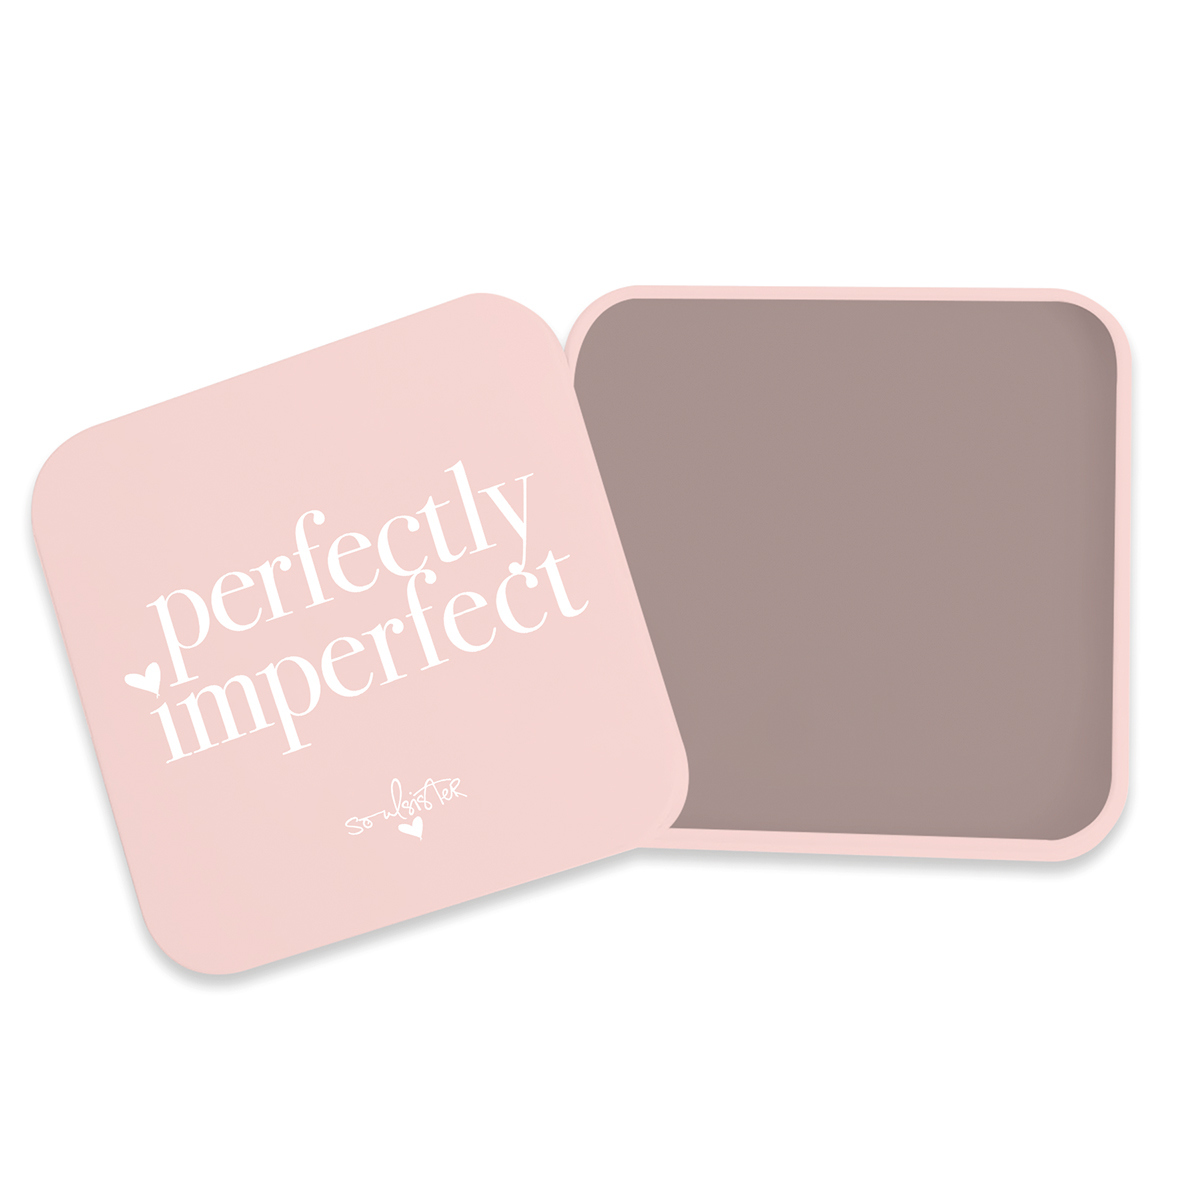 Perfectly Imperfect Geschenkdose